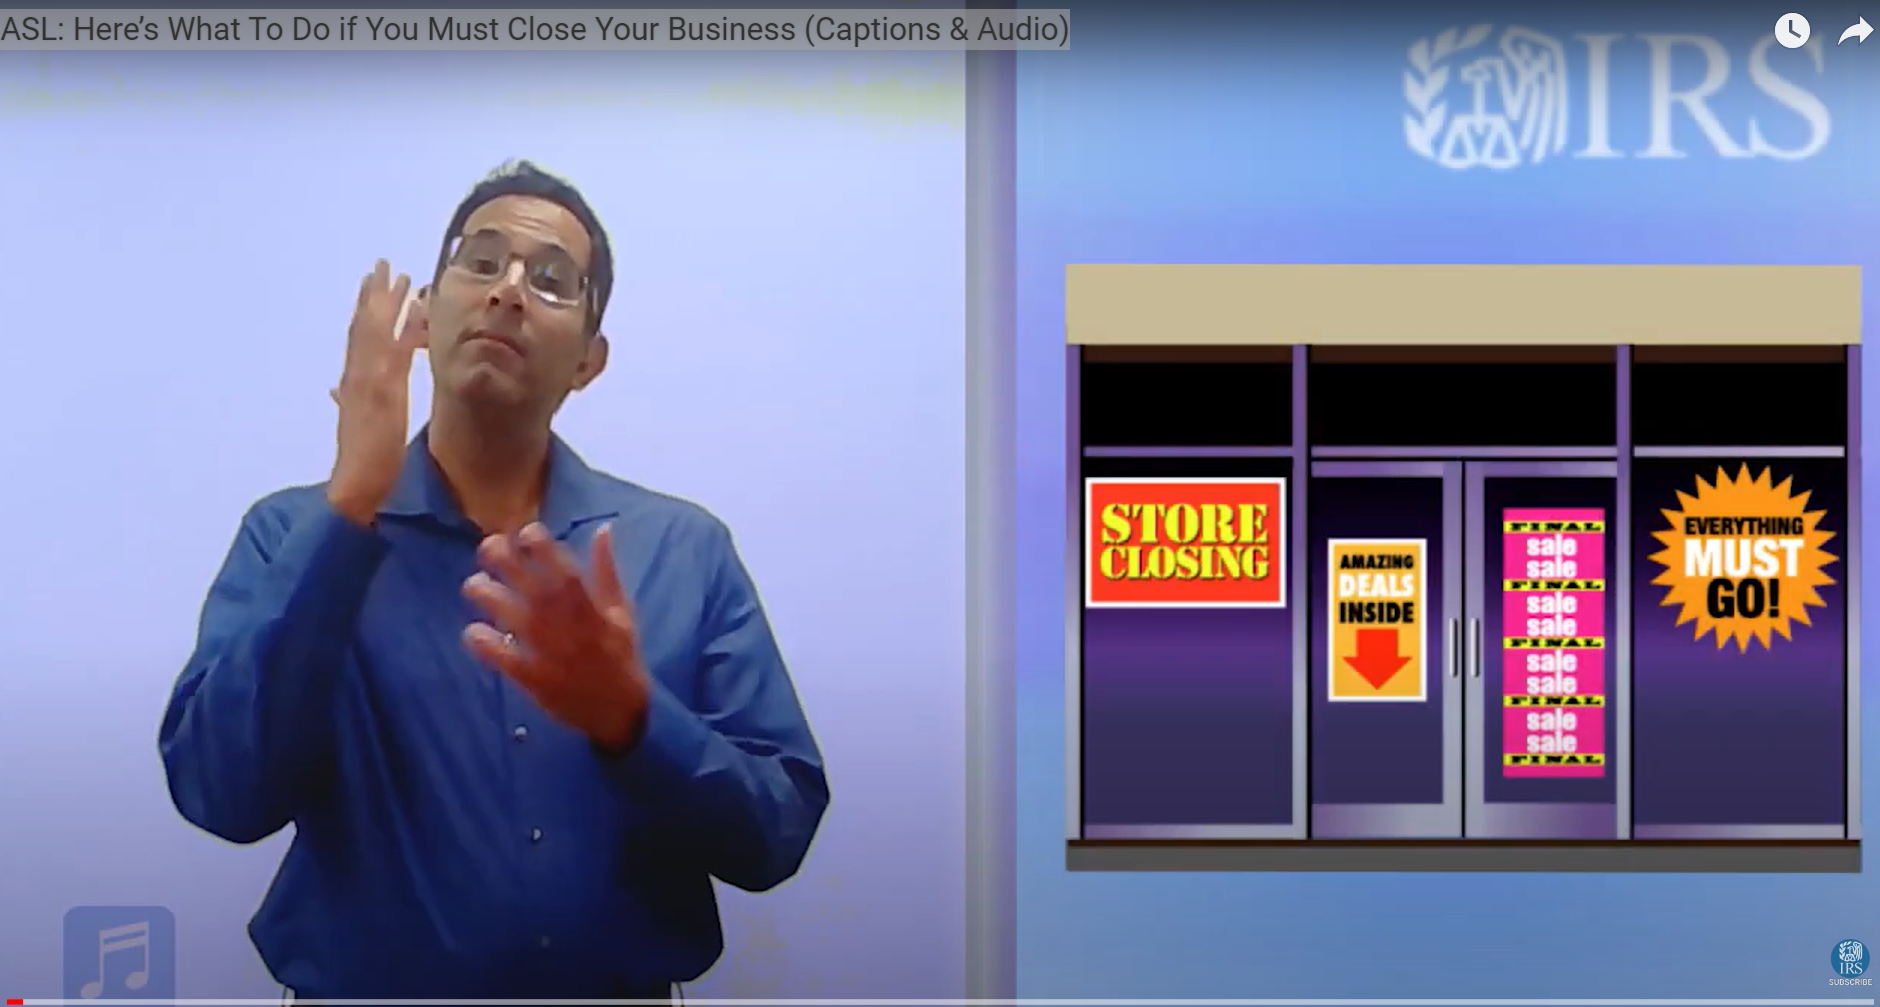 ASL: Here’s What To Do if You Must Close Your Business (Captions & Audio)